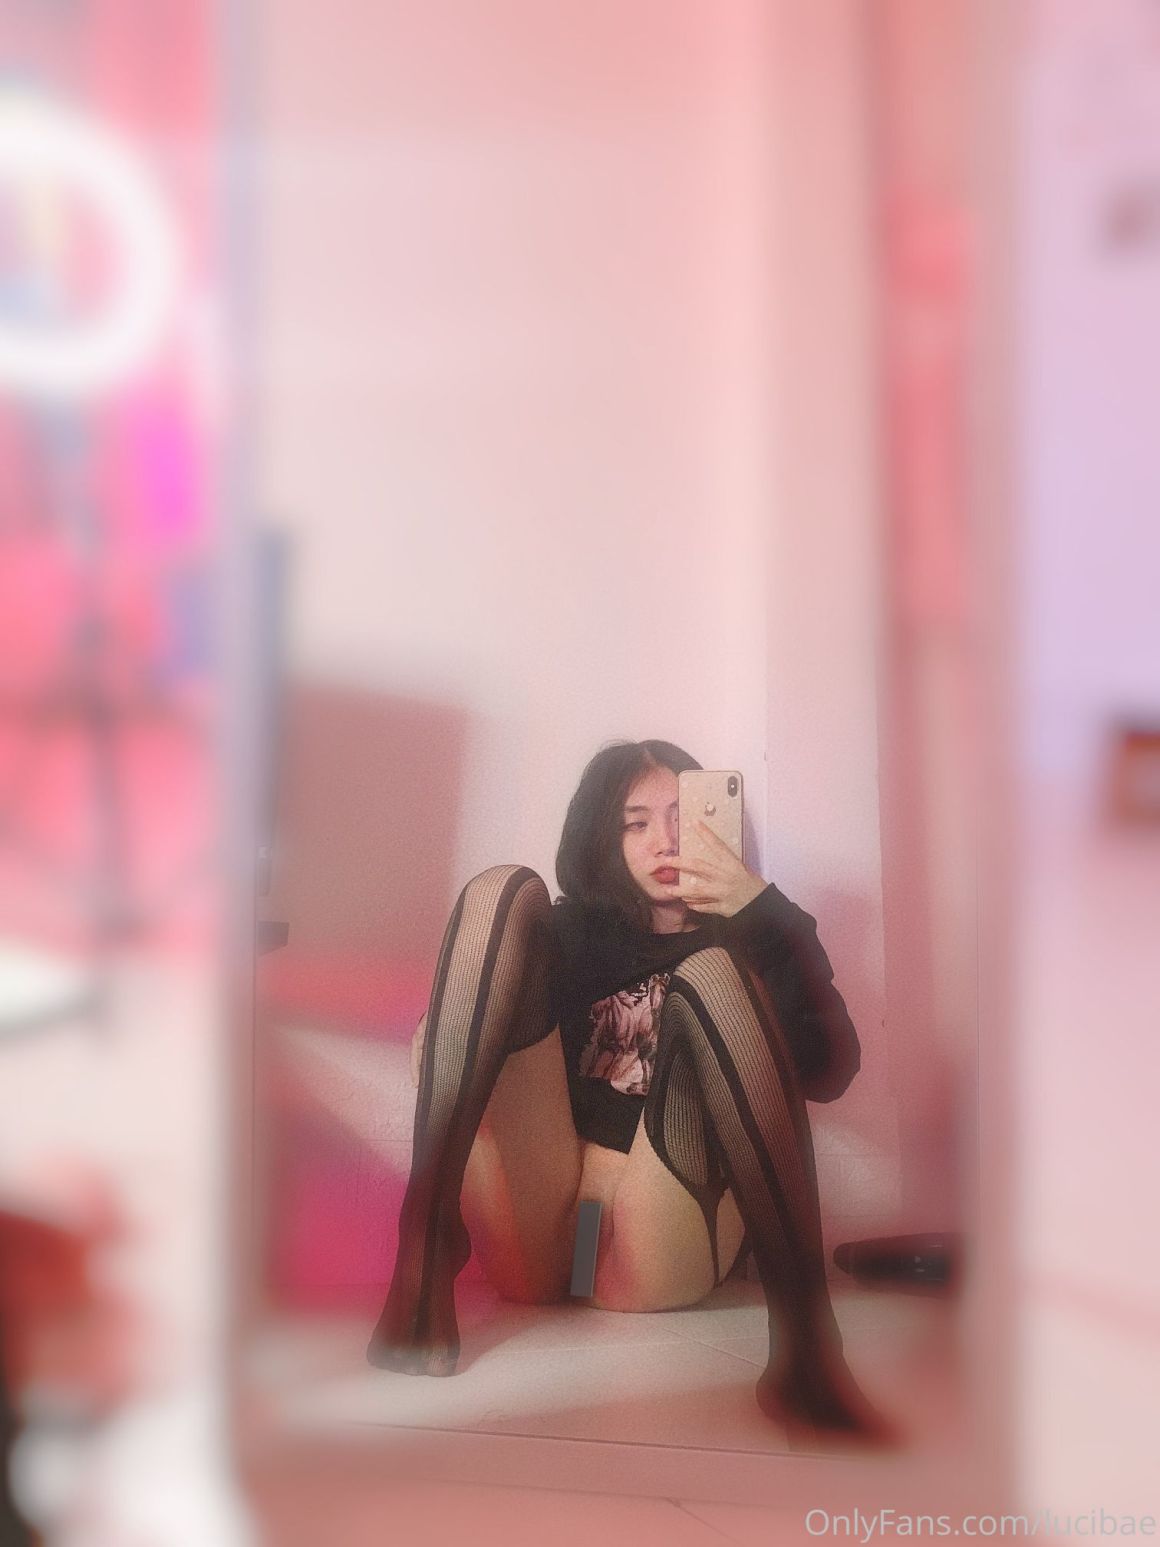 AsianOnlyfans 25 202 20210909